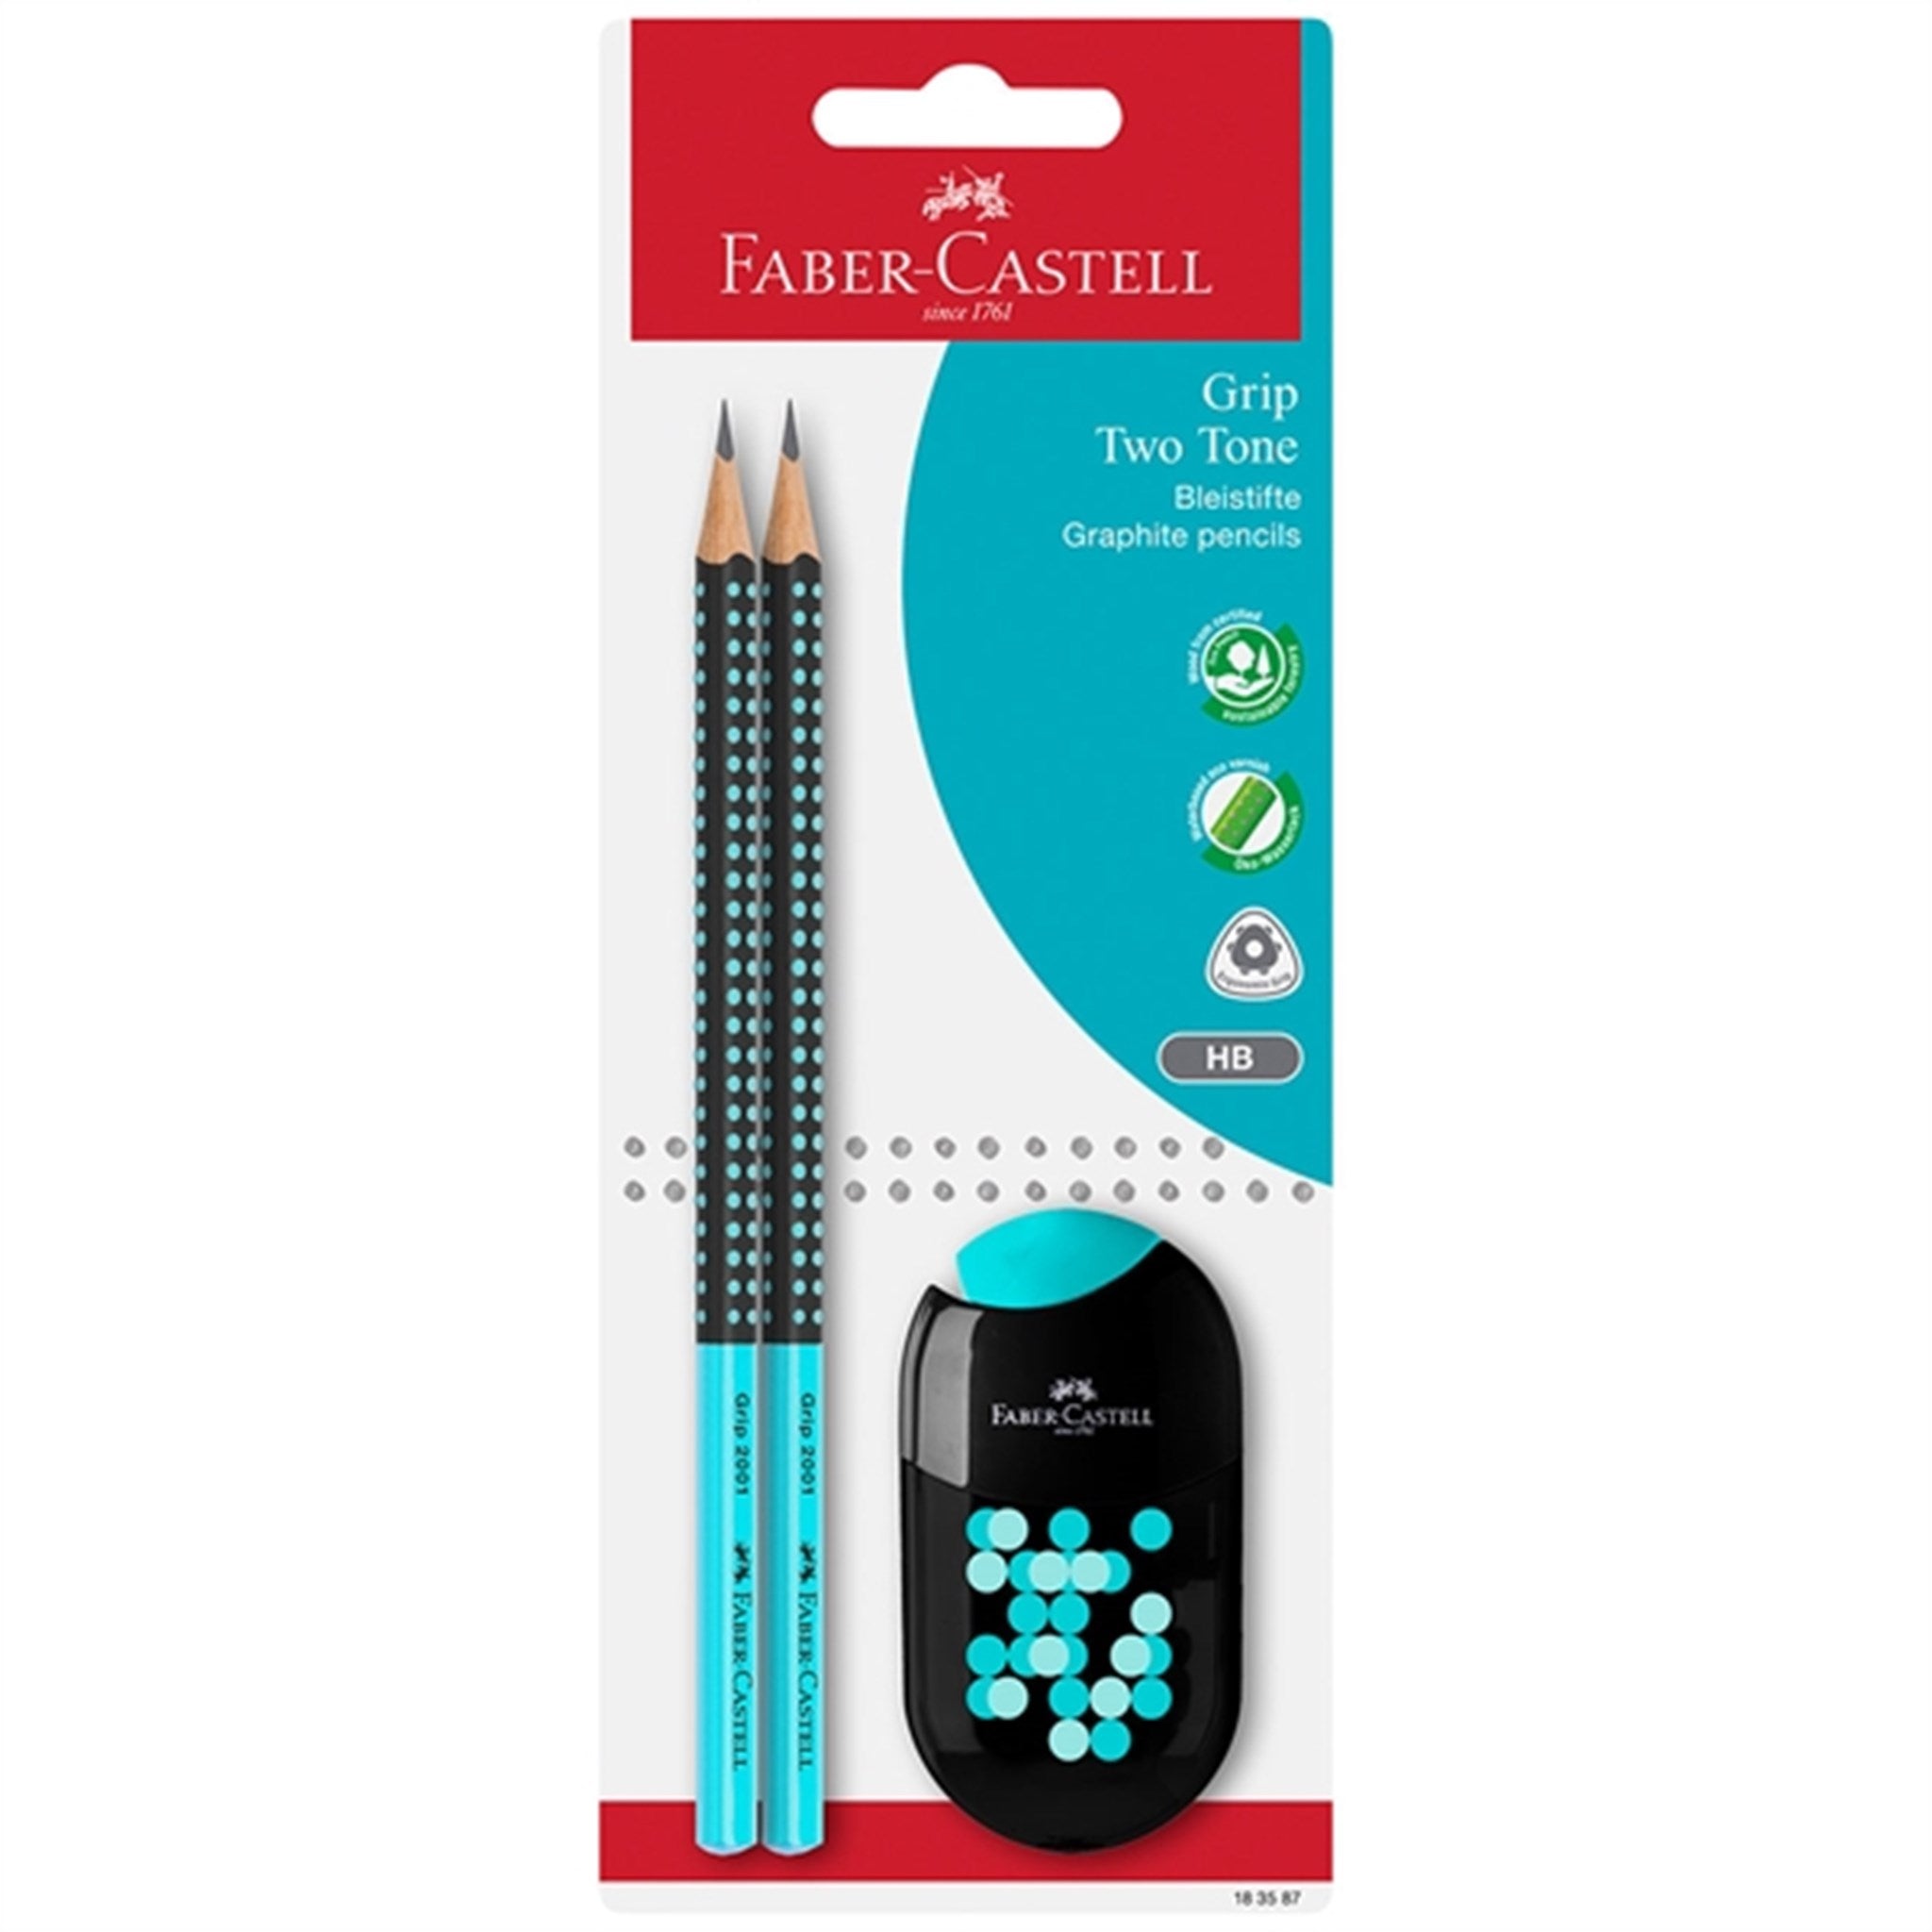 Faber-Castell Grip 2001 Two Tone Pencil, Pencil Sharpener - Turquoise